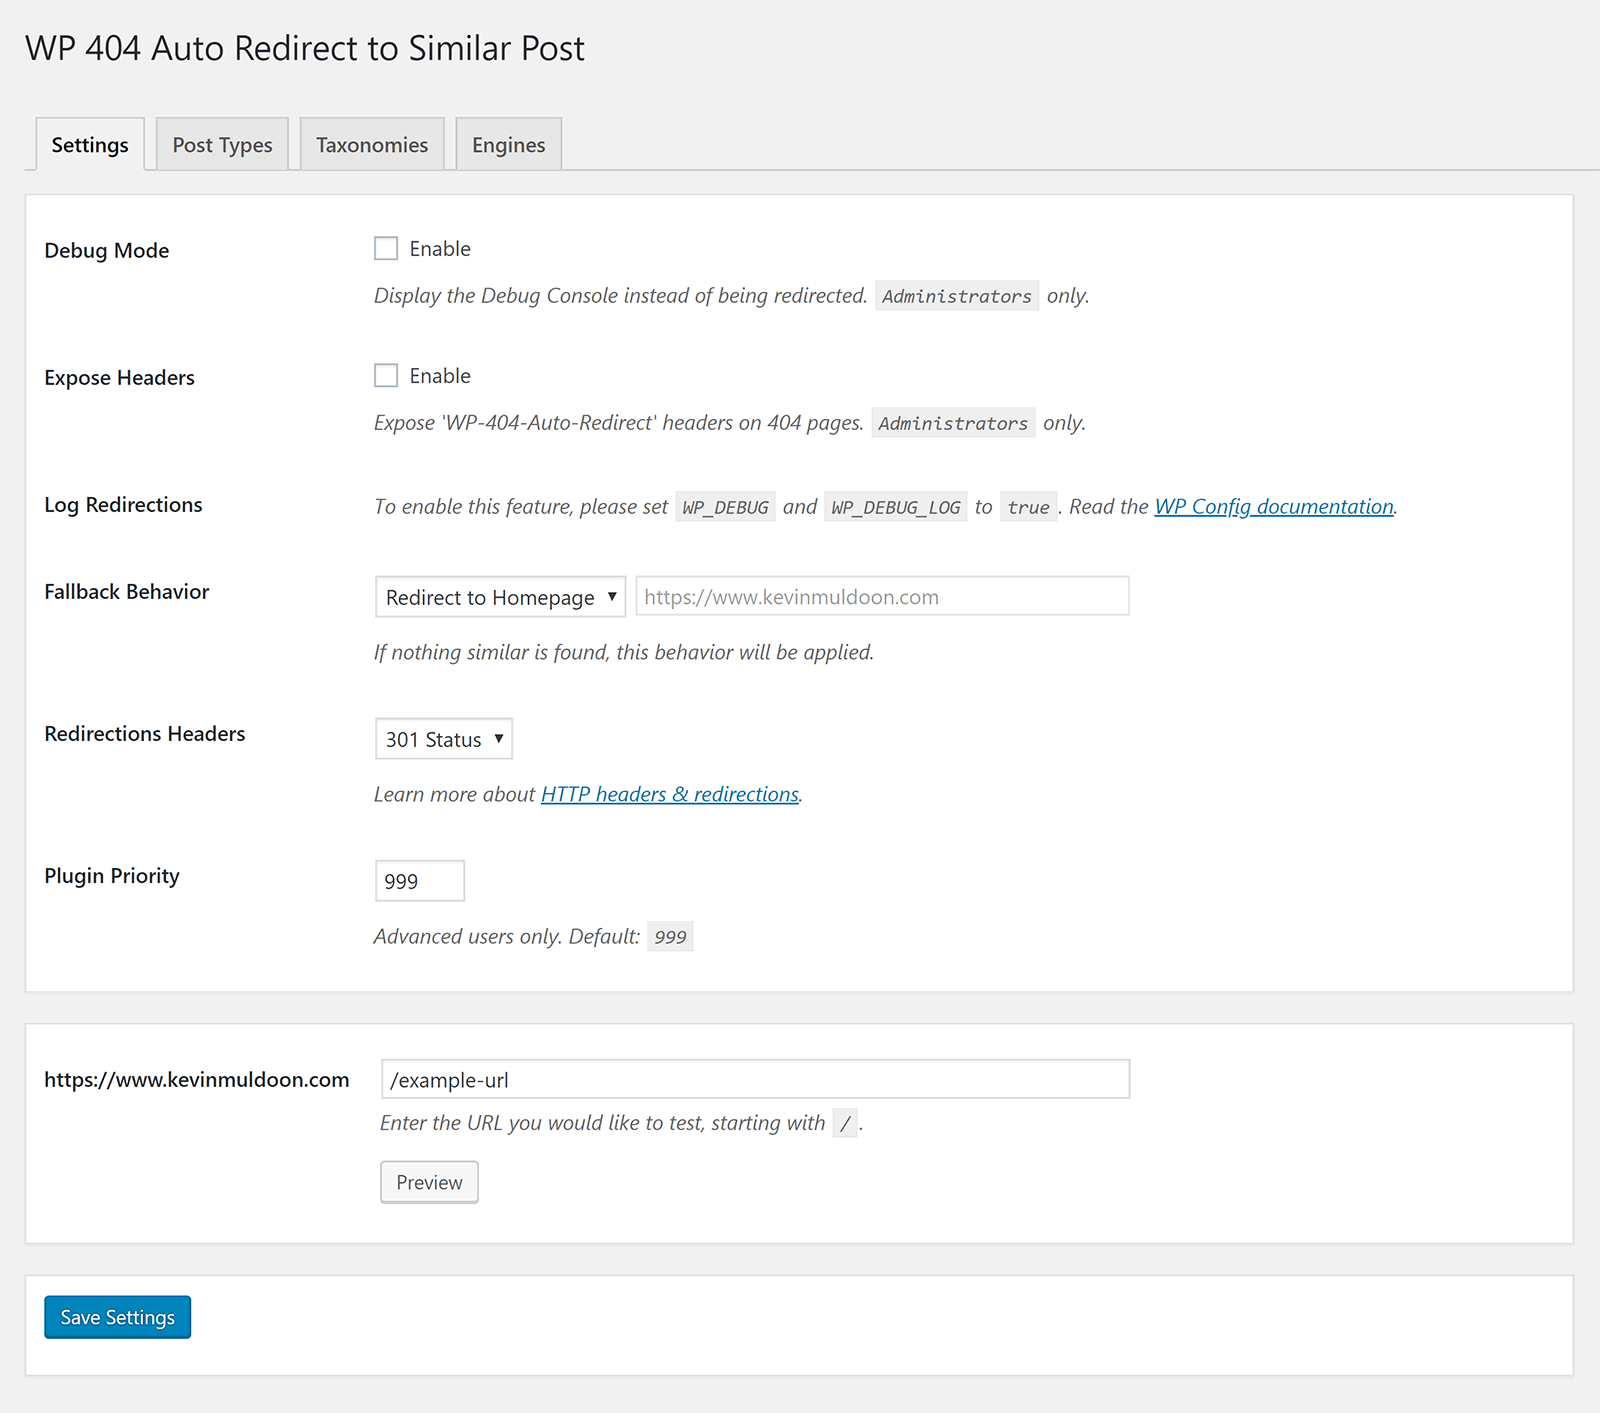 Settings for WP 404 Auto Redirect to Similar Post